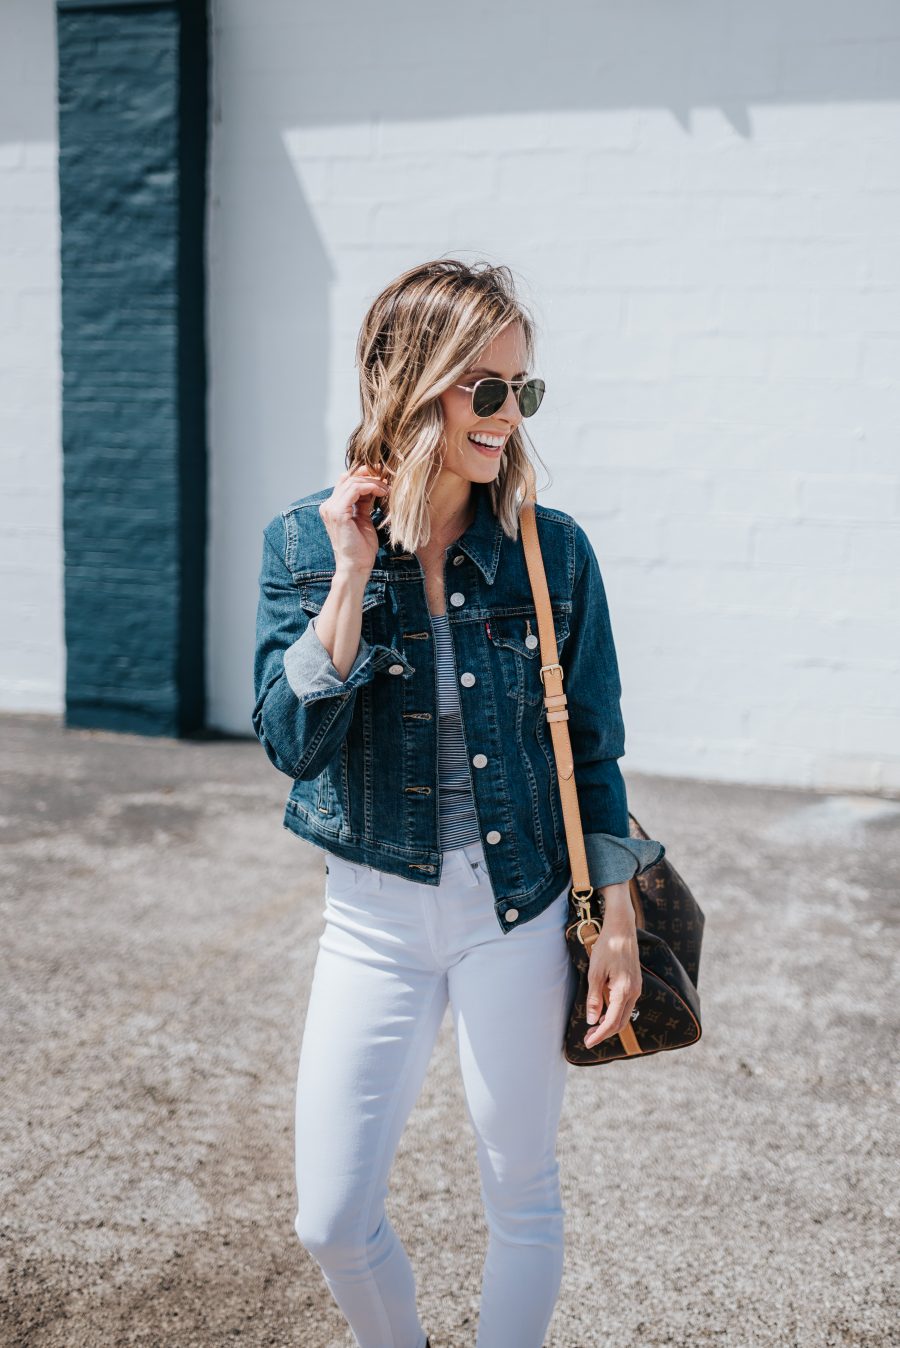 The Best Labor Day Sales + My Looks On Sale - My Kind of Sweet